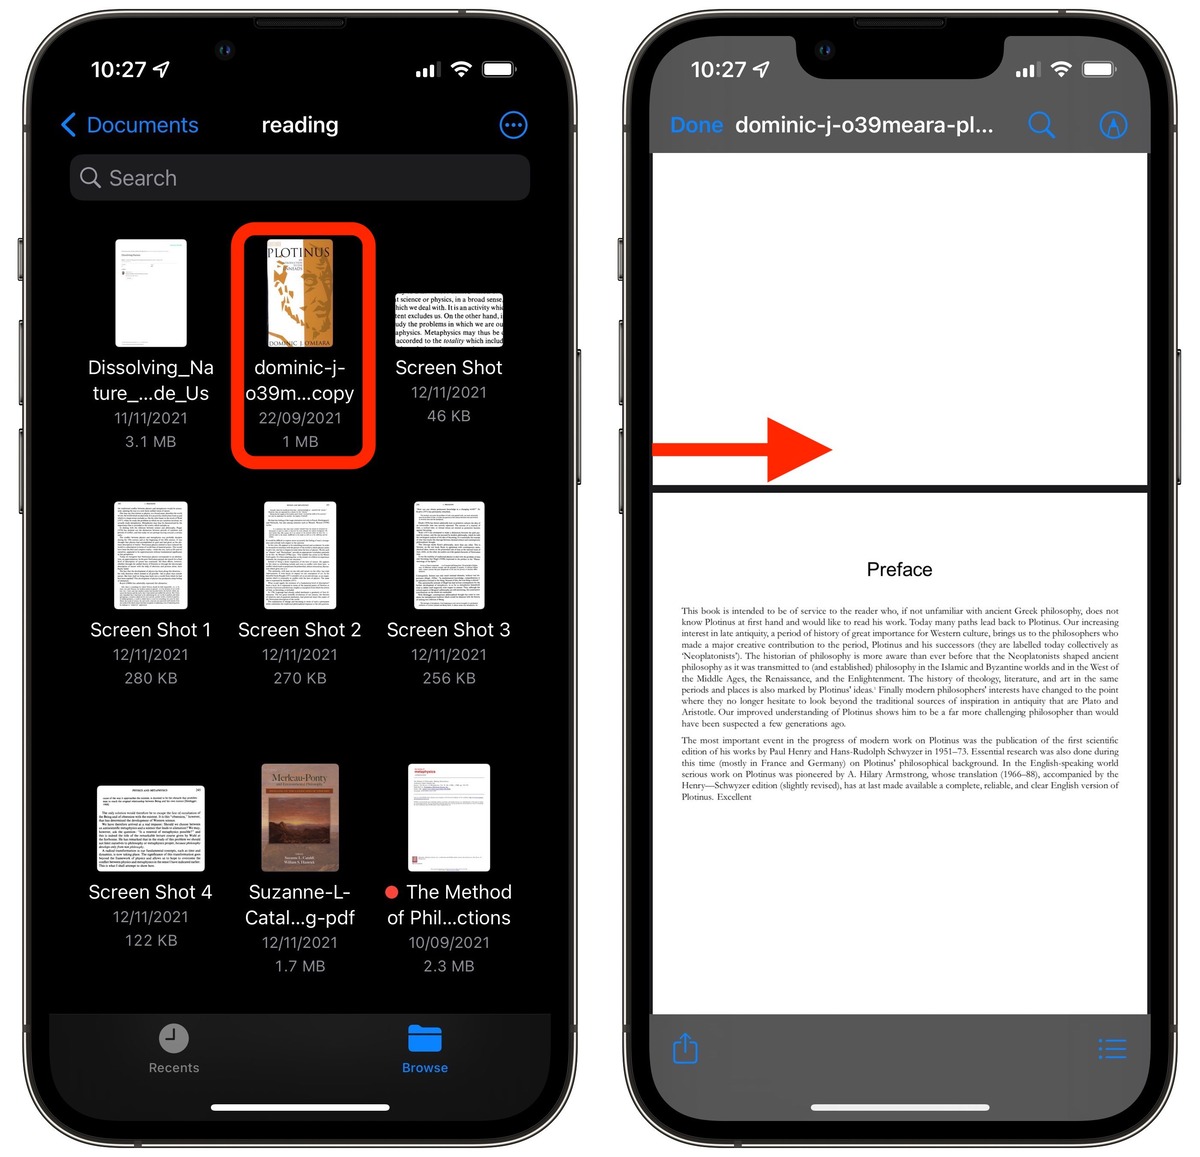 how-to-edit-a-pdf-on-iphone-ipad-using-the-files-app